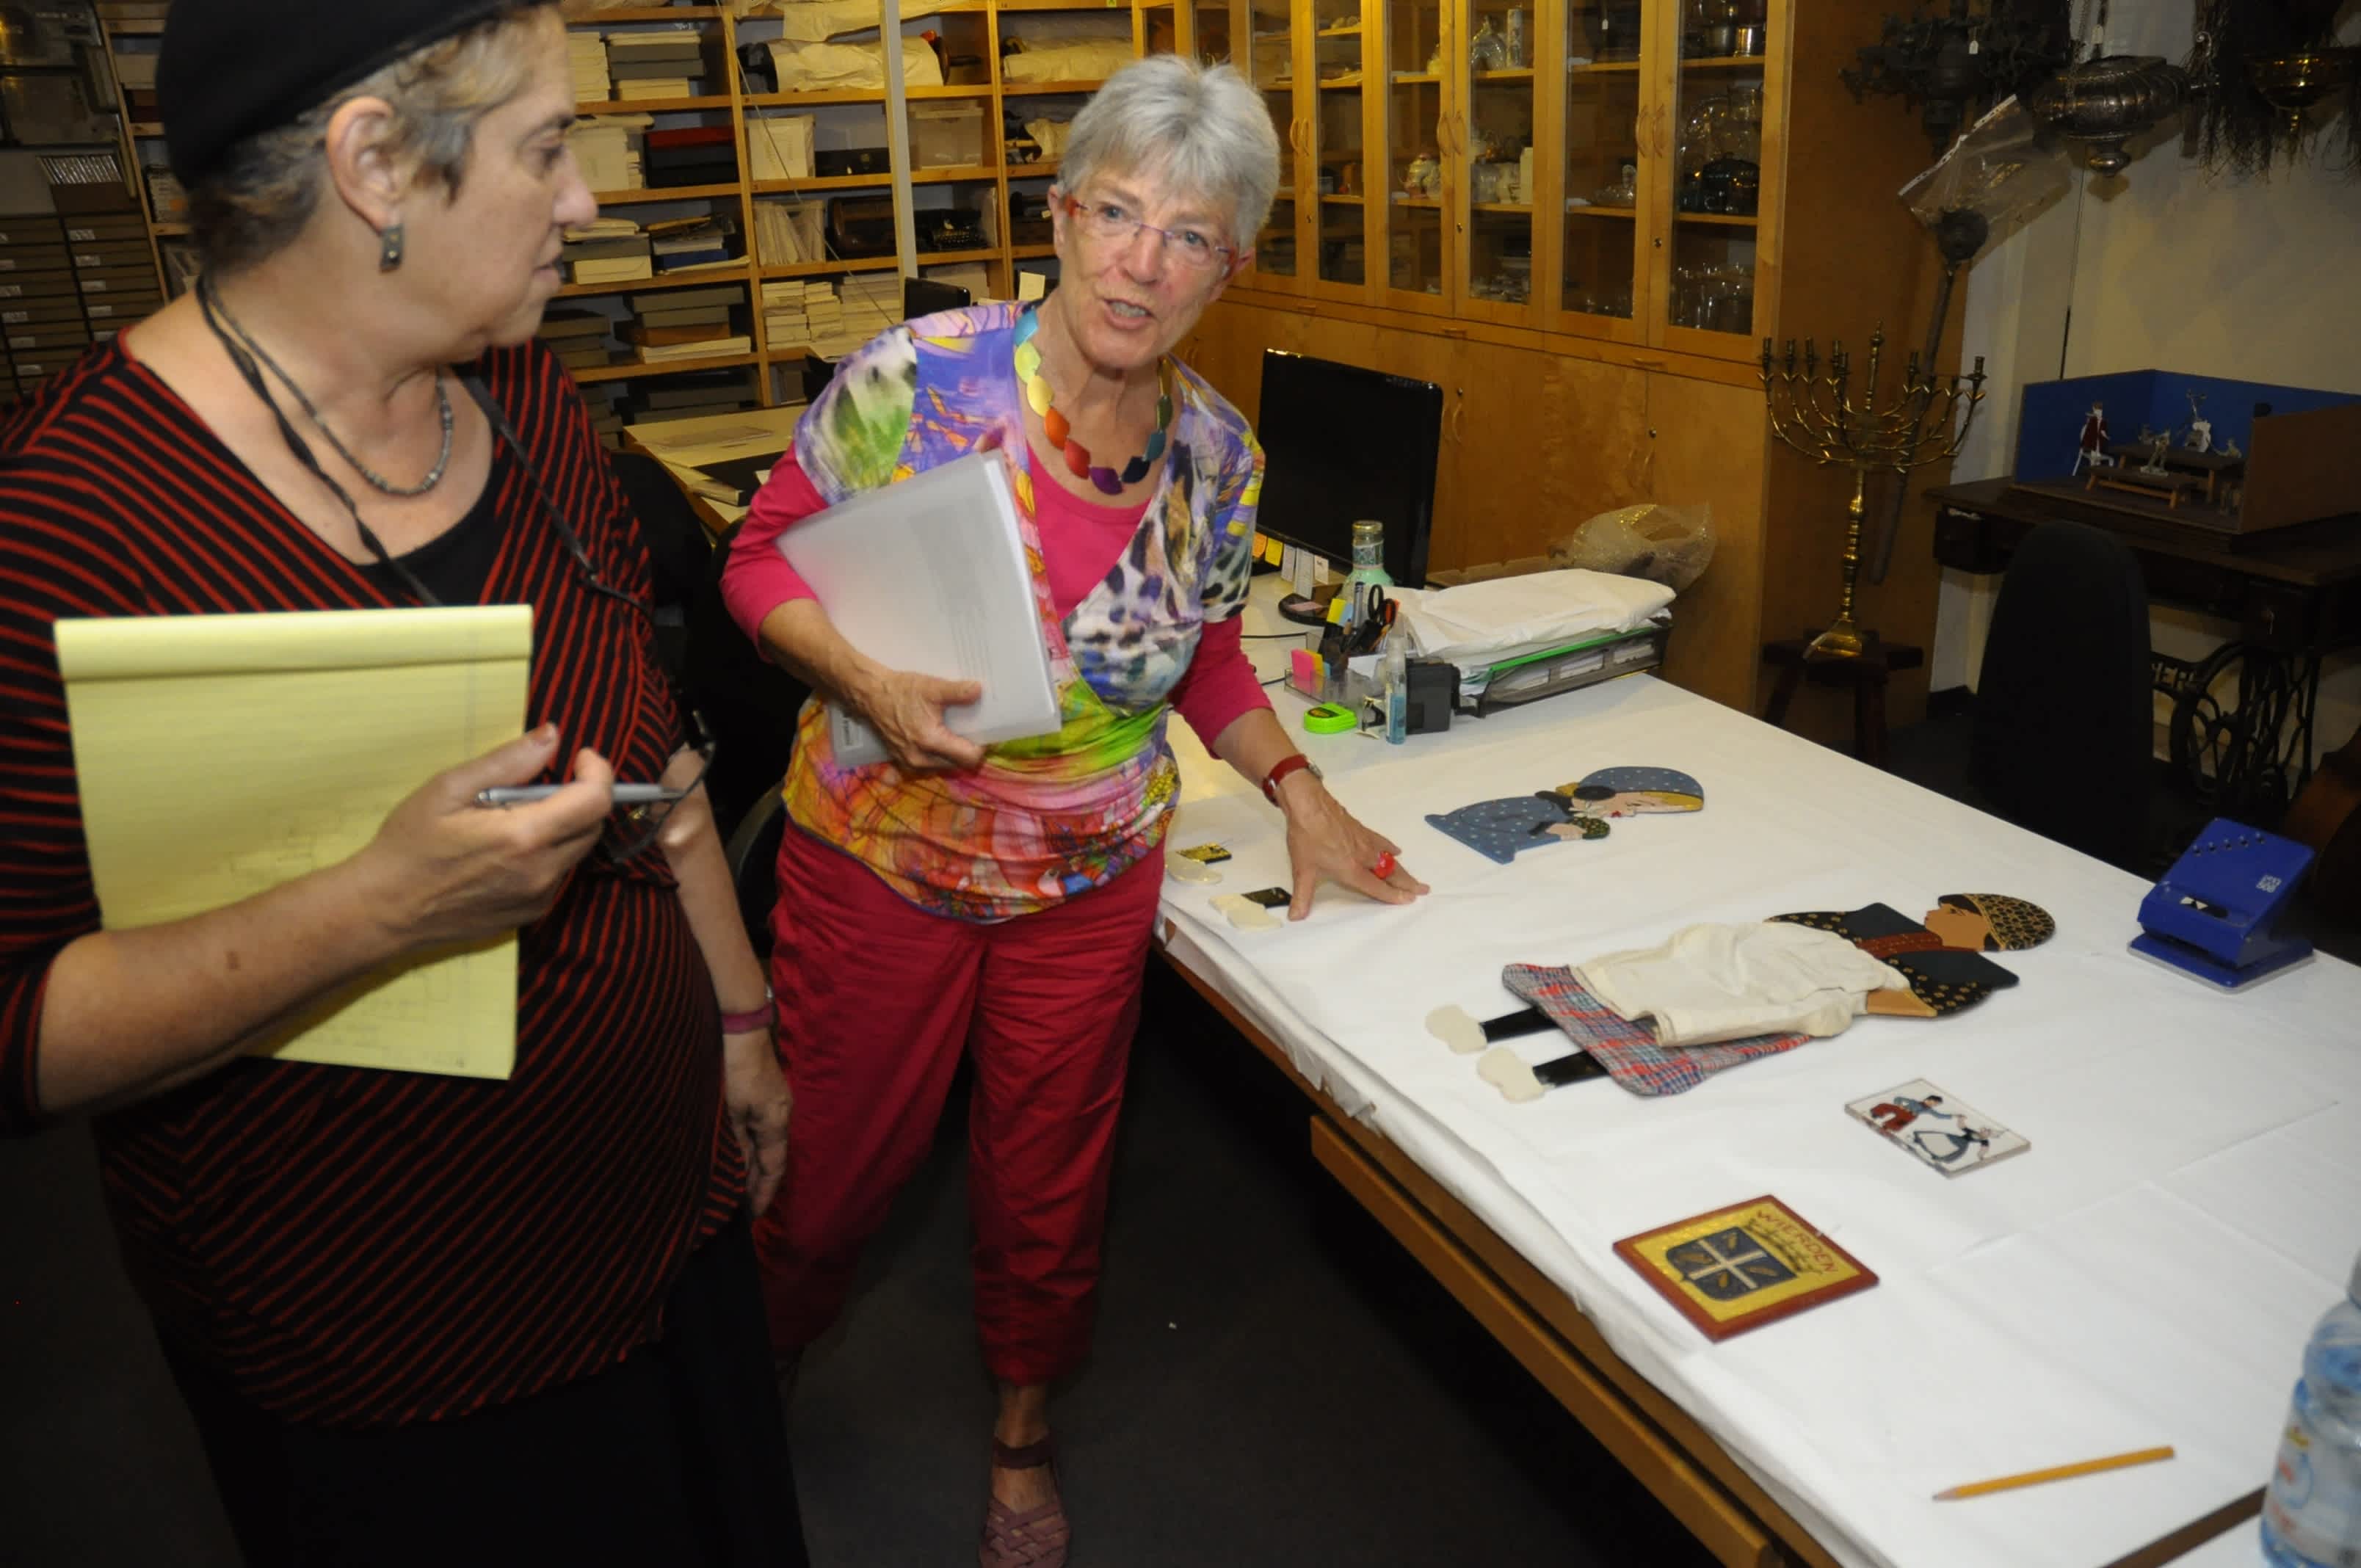 Wilma, the rescuers' daughter, visiting the Artifacts Department of Yad Vashem on 14/10/2014.